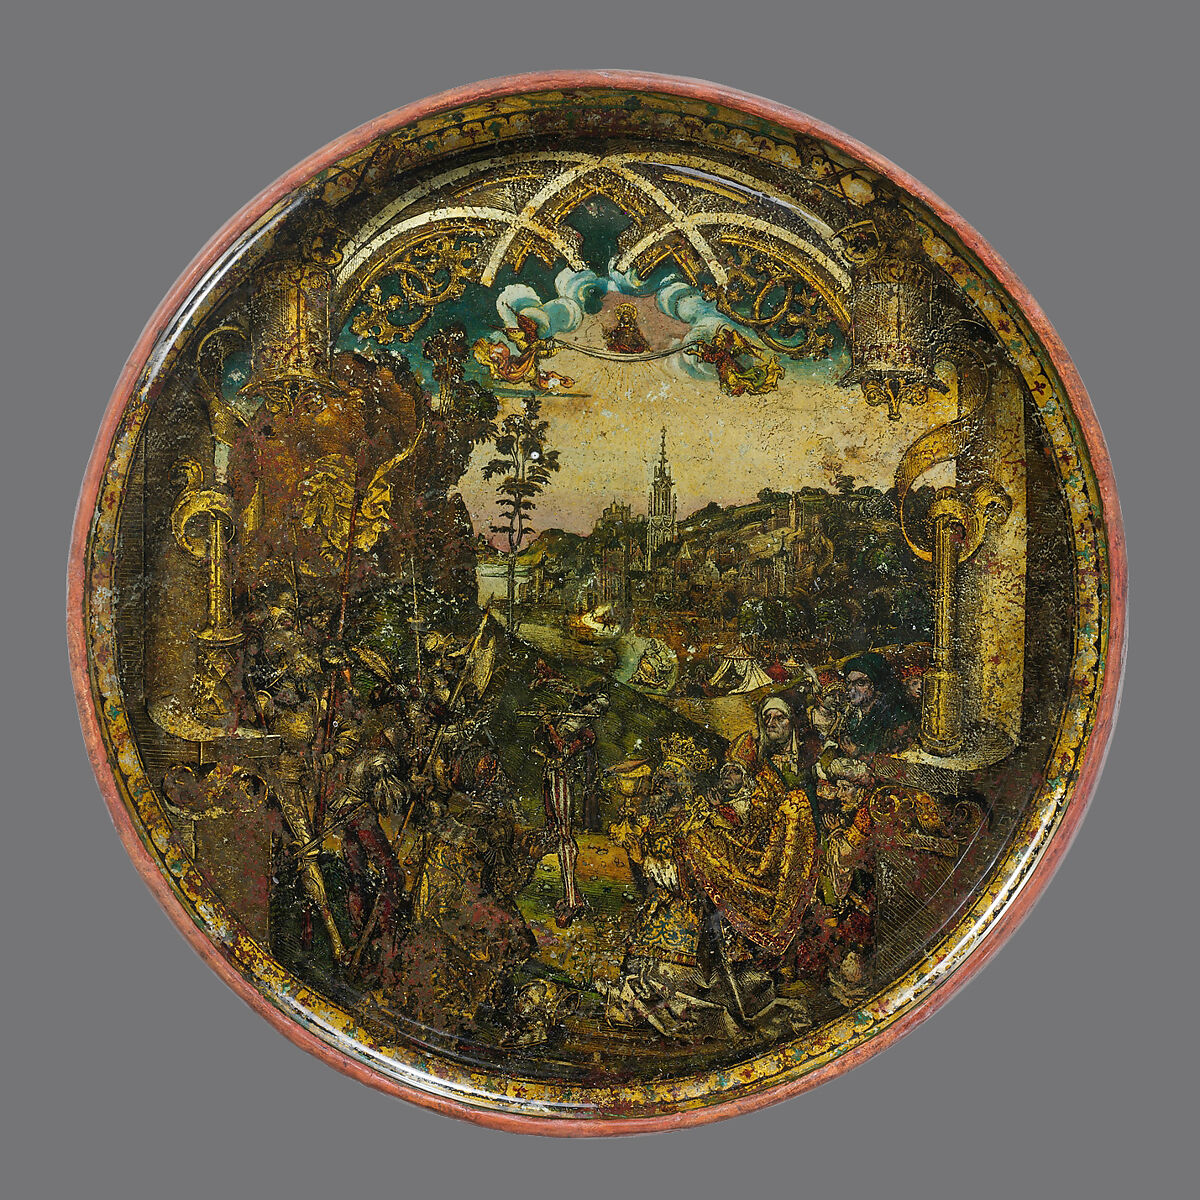 Dish with Abraham and Melchizedek, Hans of Landshut (German, Landshut, active late 15th century), Free-blown glass with paint and metallic foils, South German 